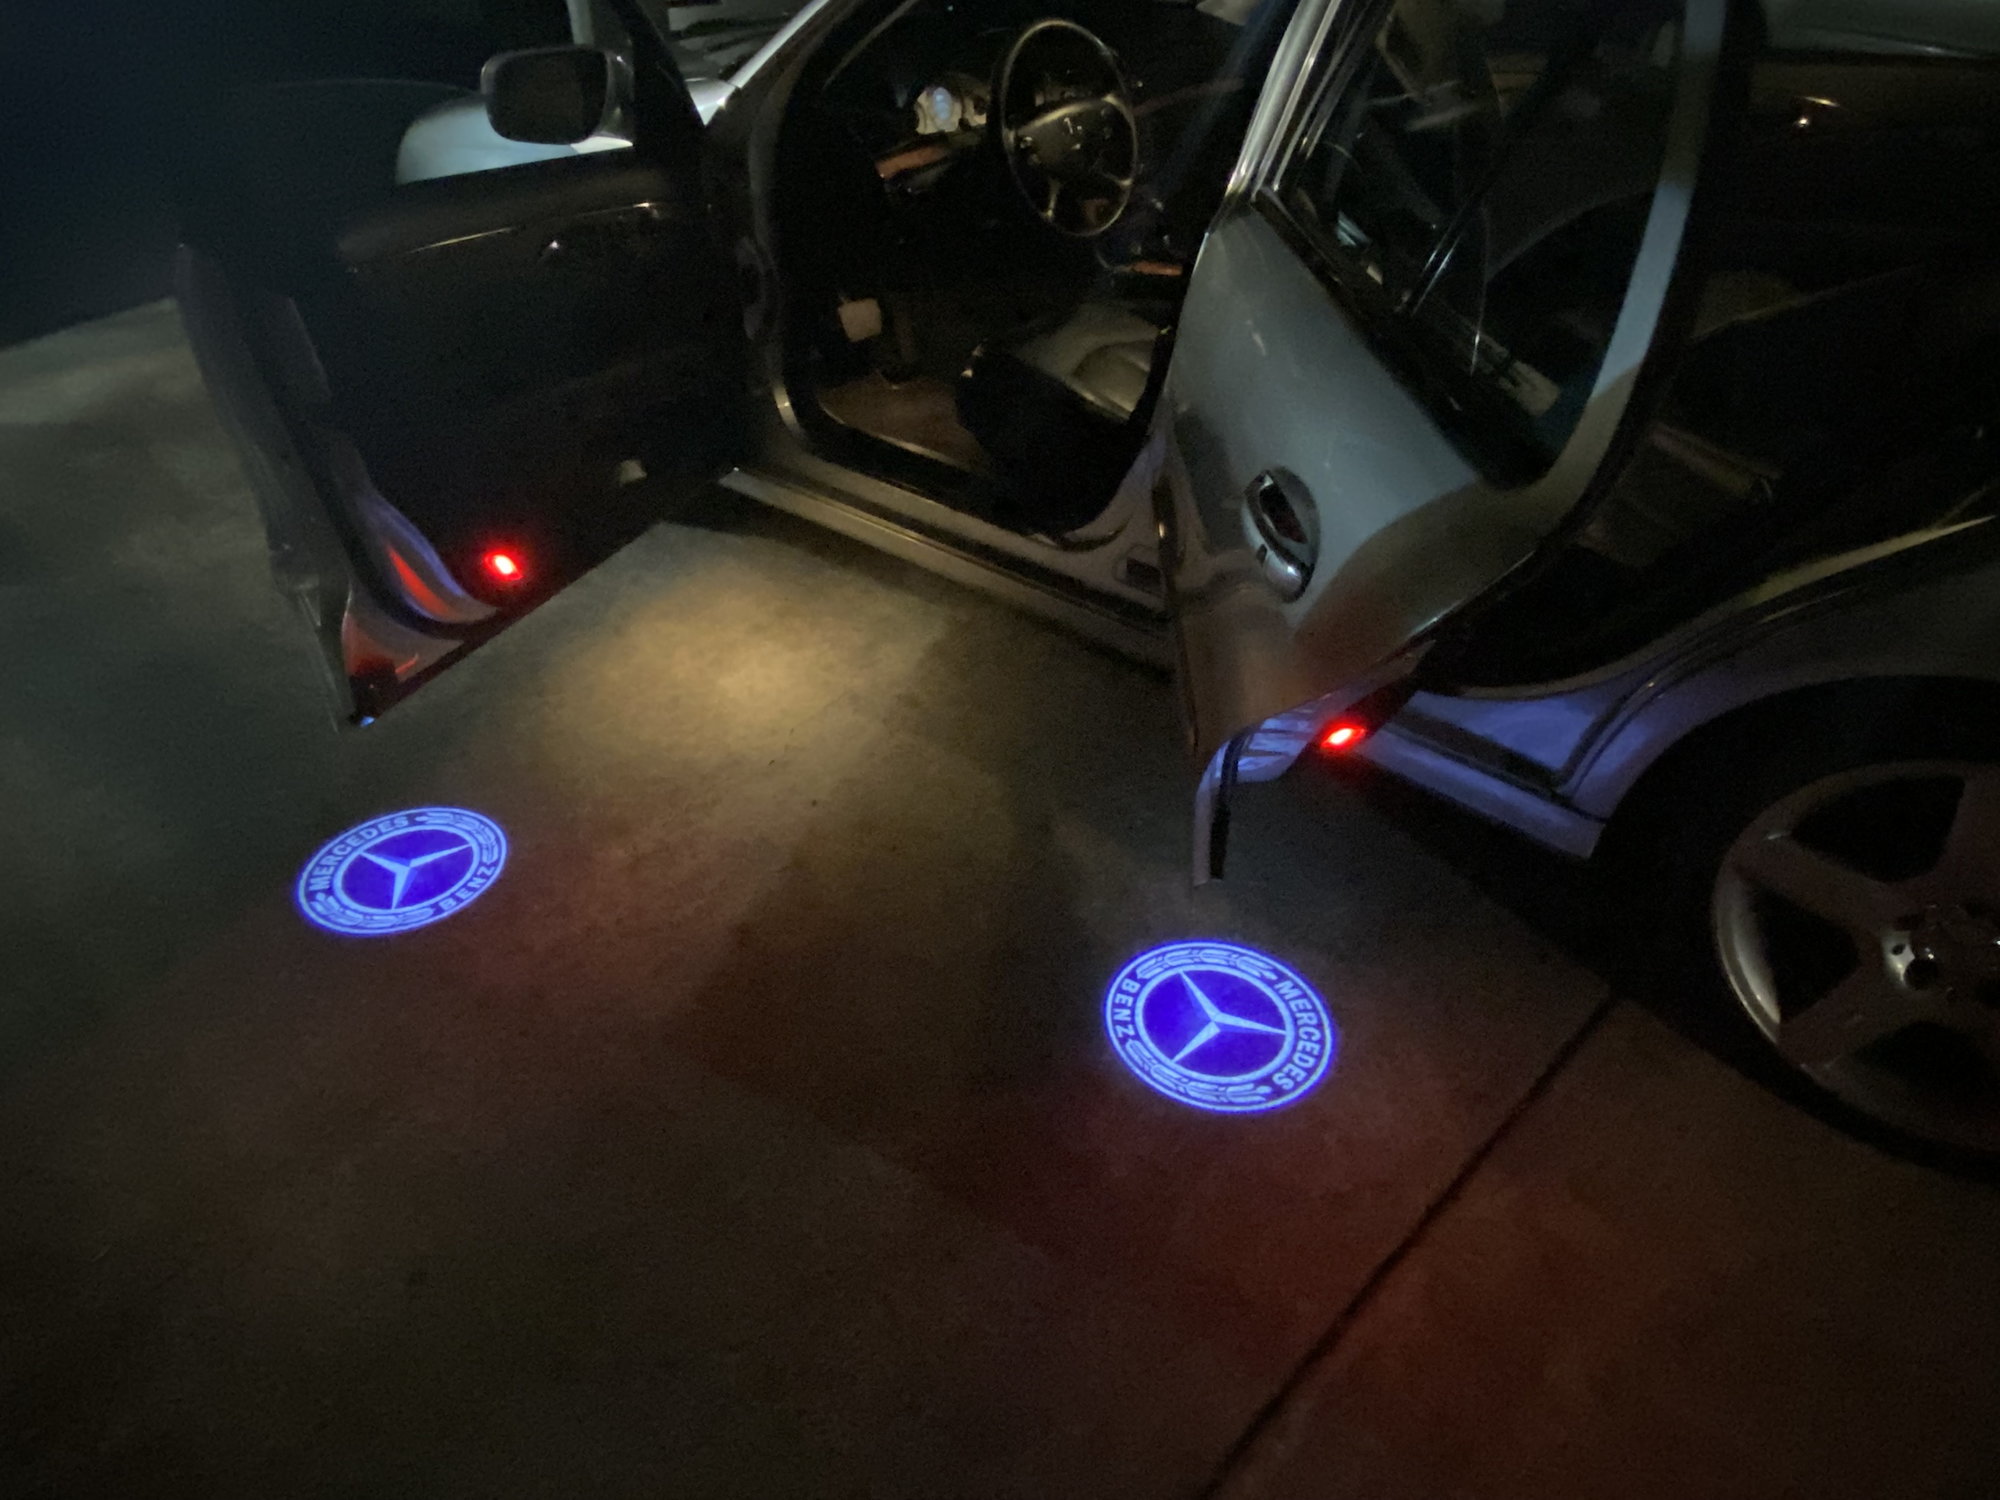 Finally. Phantom/Puddle/Ghost lights for my W211 E350 -   Forums